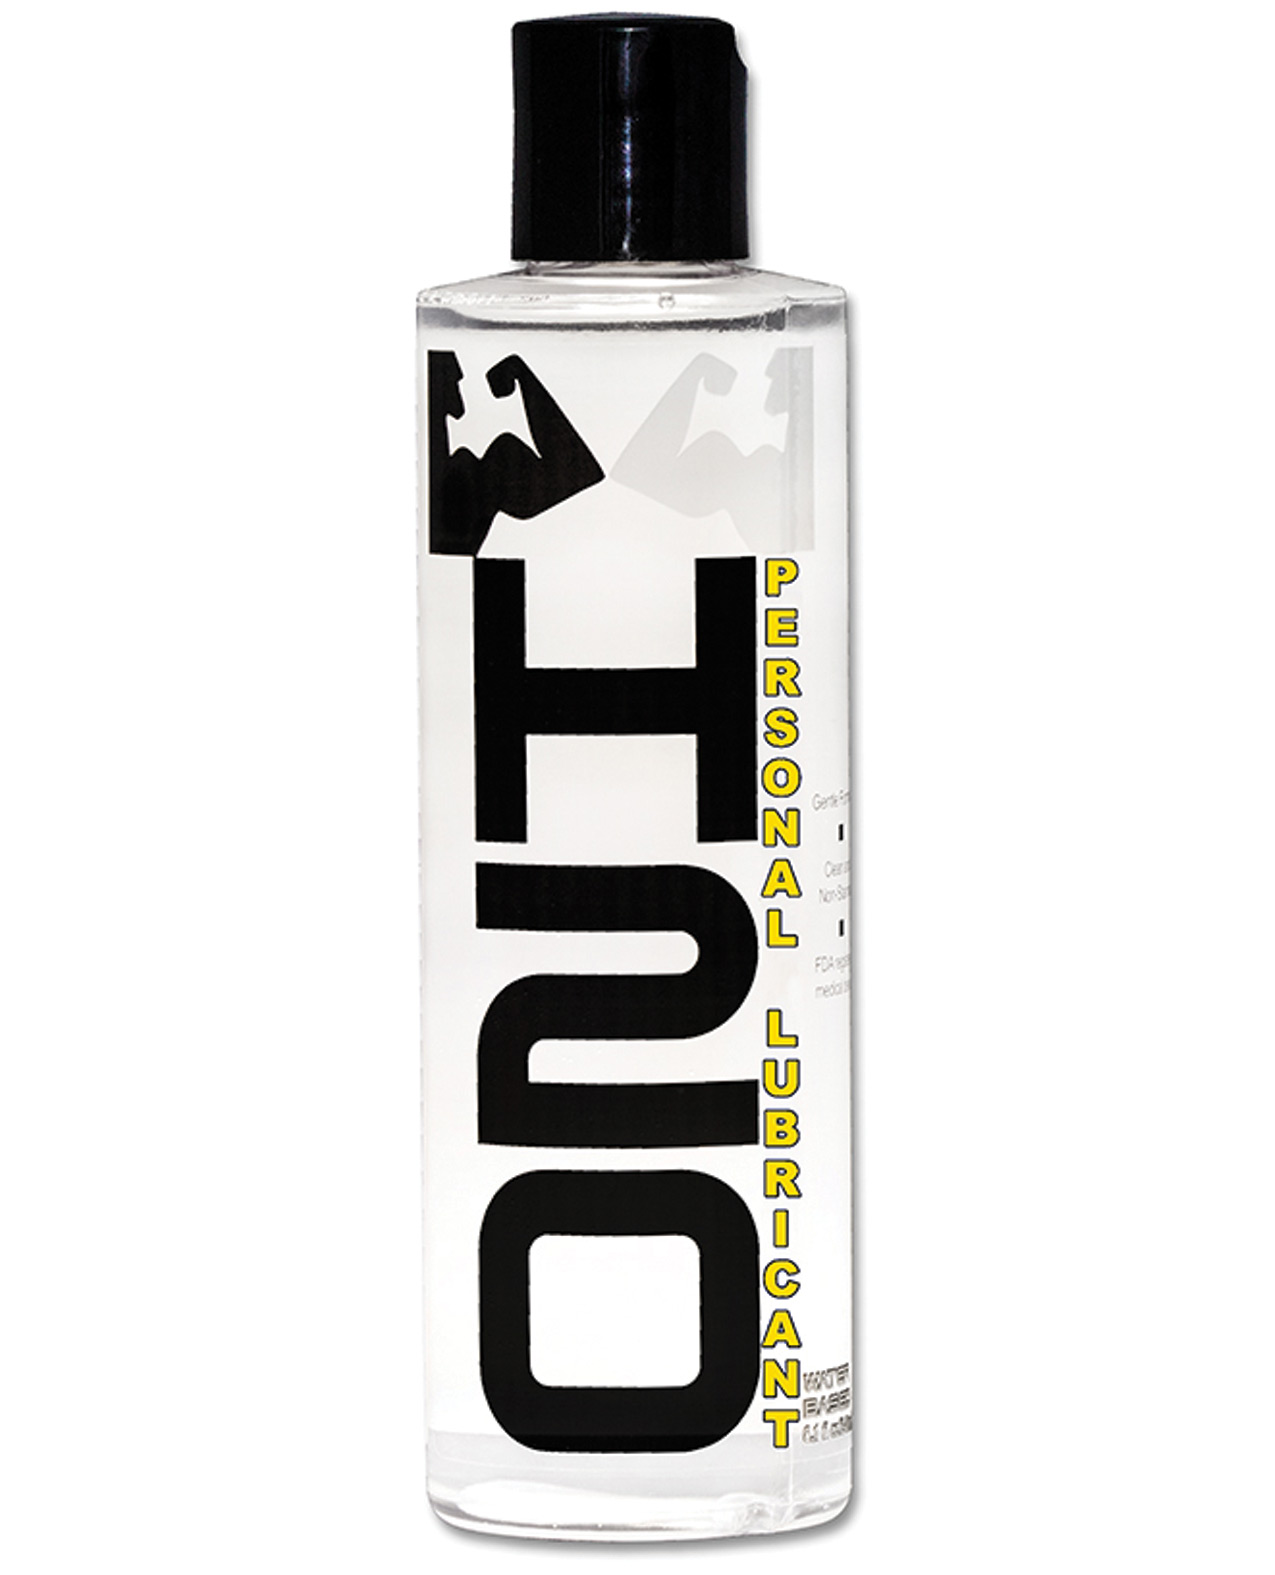 Elbow Grease H2O Personal Lubricant - 8.1 oz